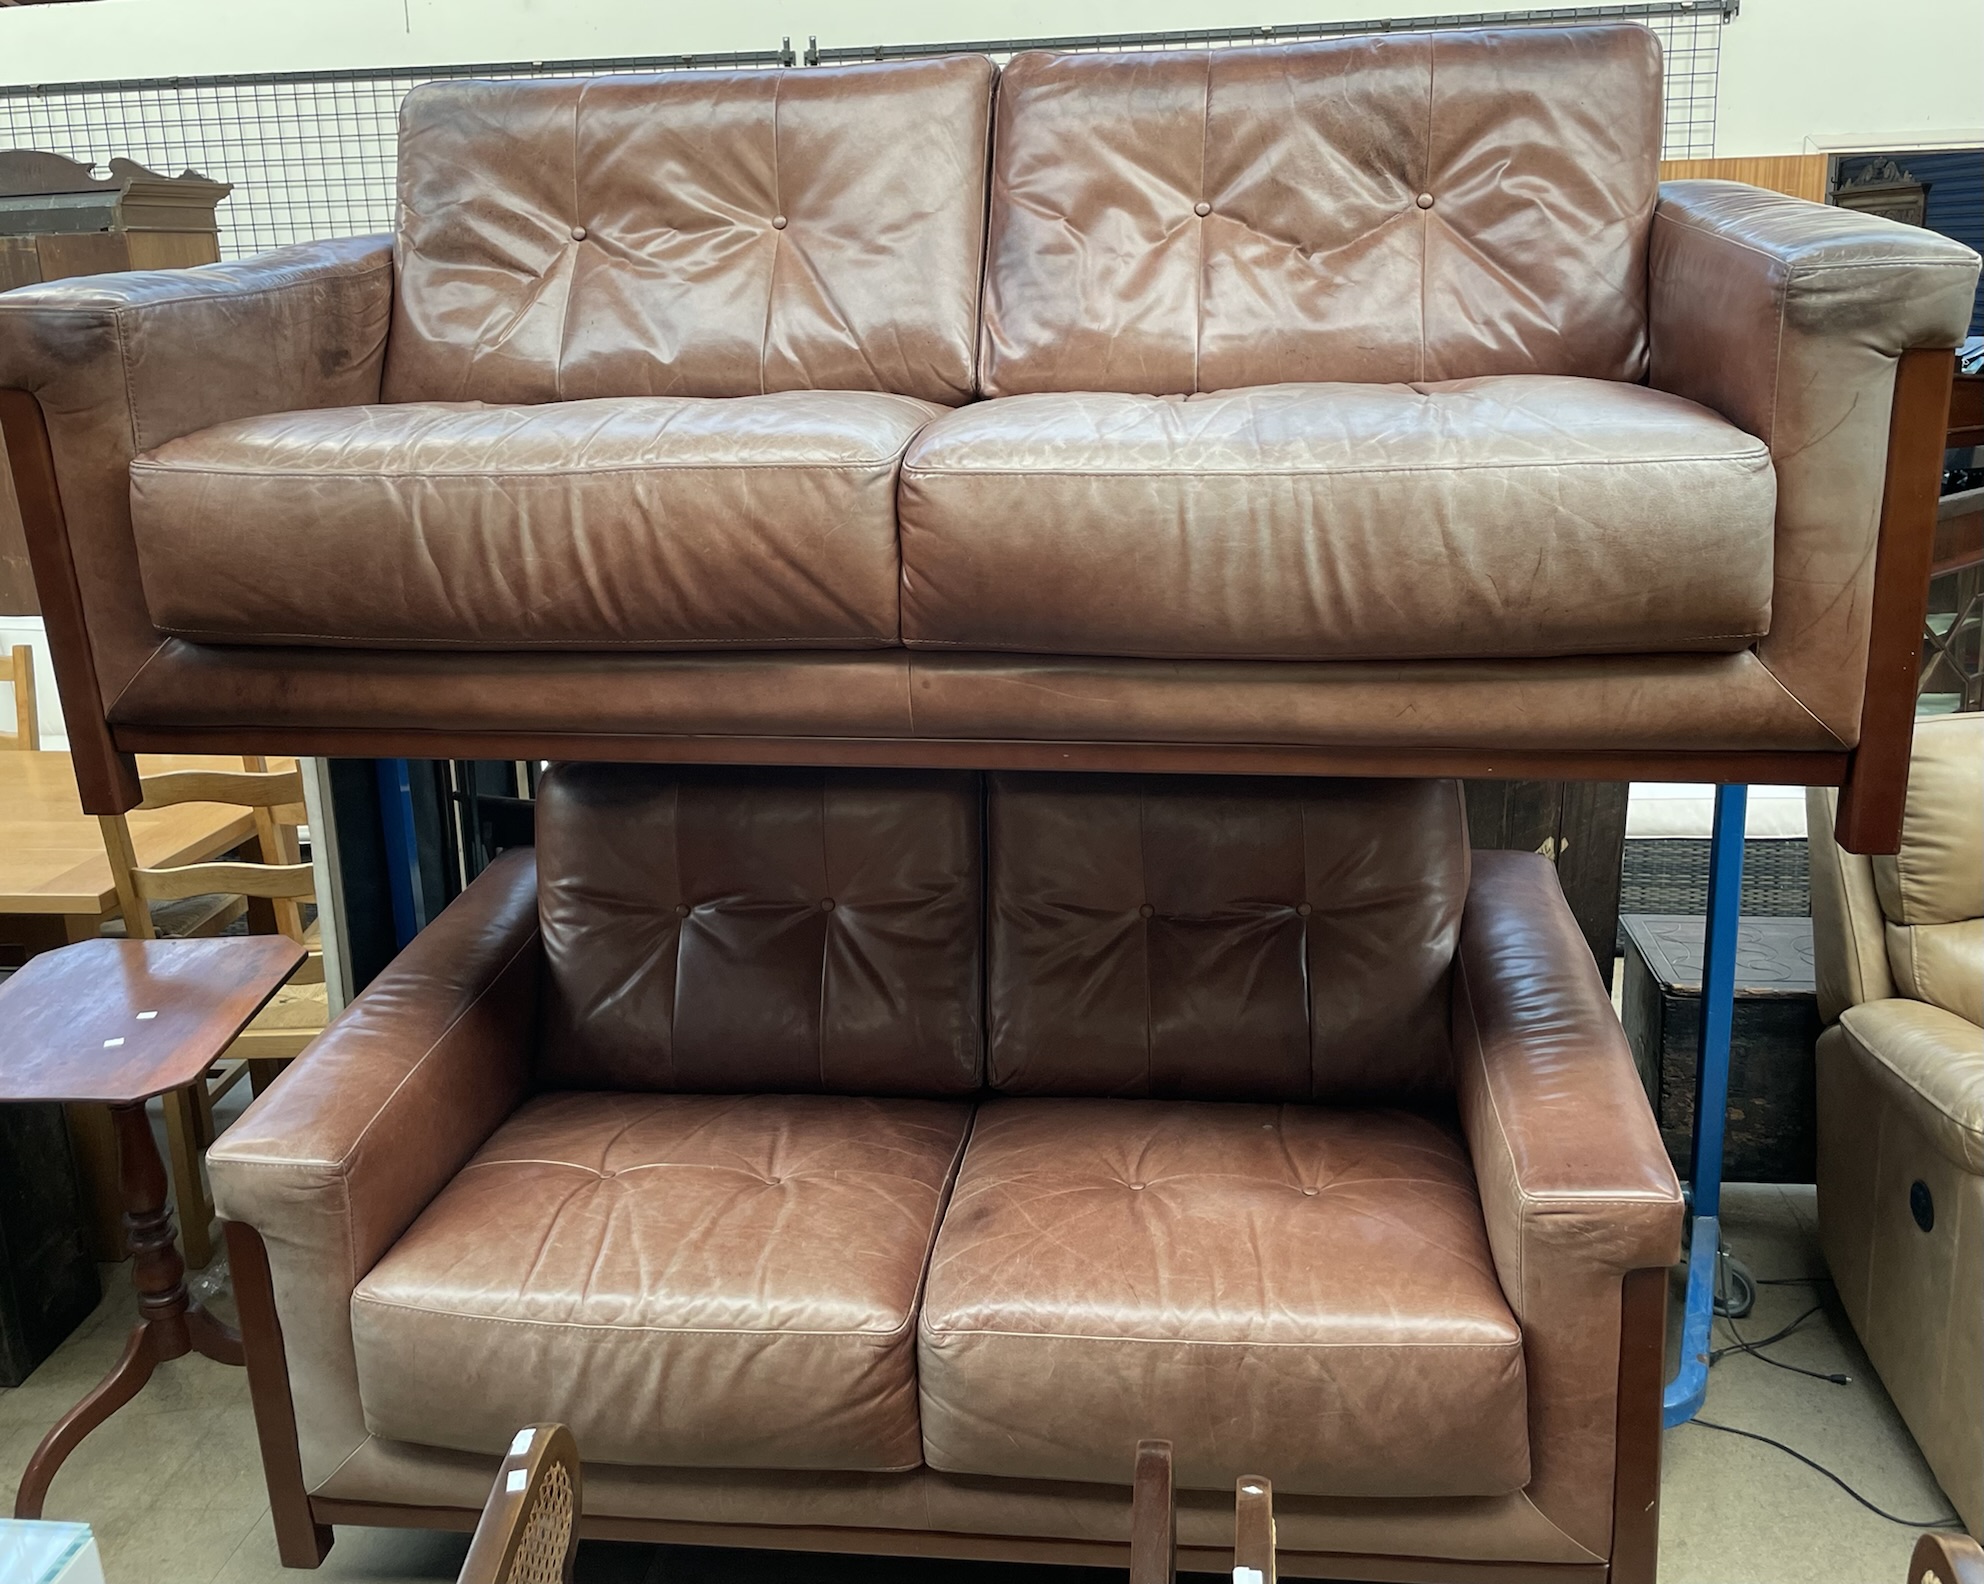 A brown leather Sofitalia three seater settee together with a matching two seater settee